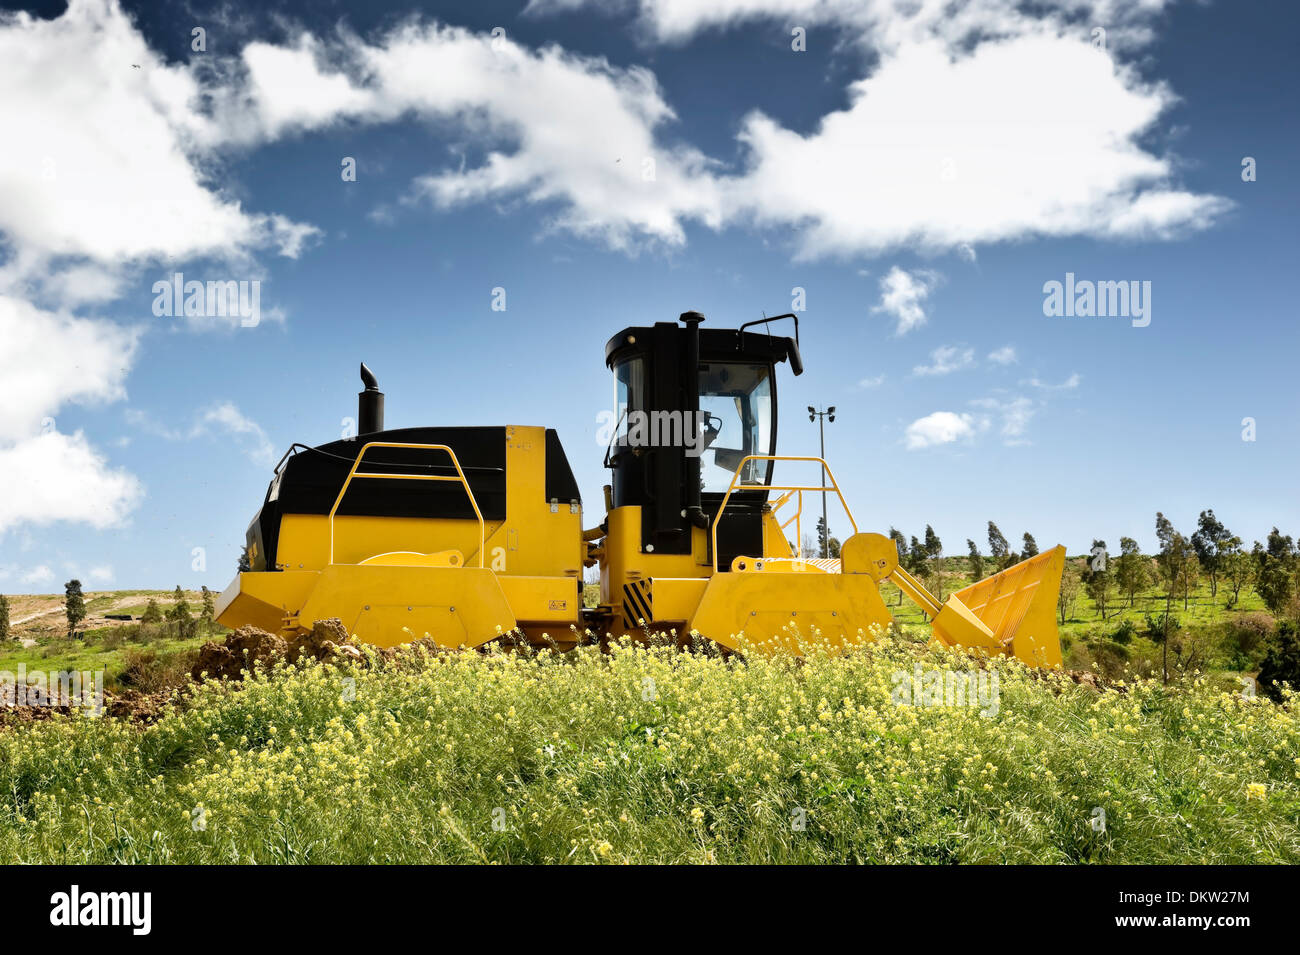 Heavy machinery in a green field Stock Photo